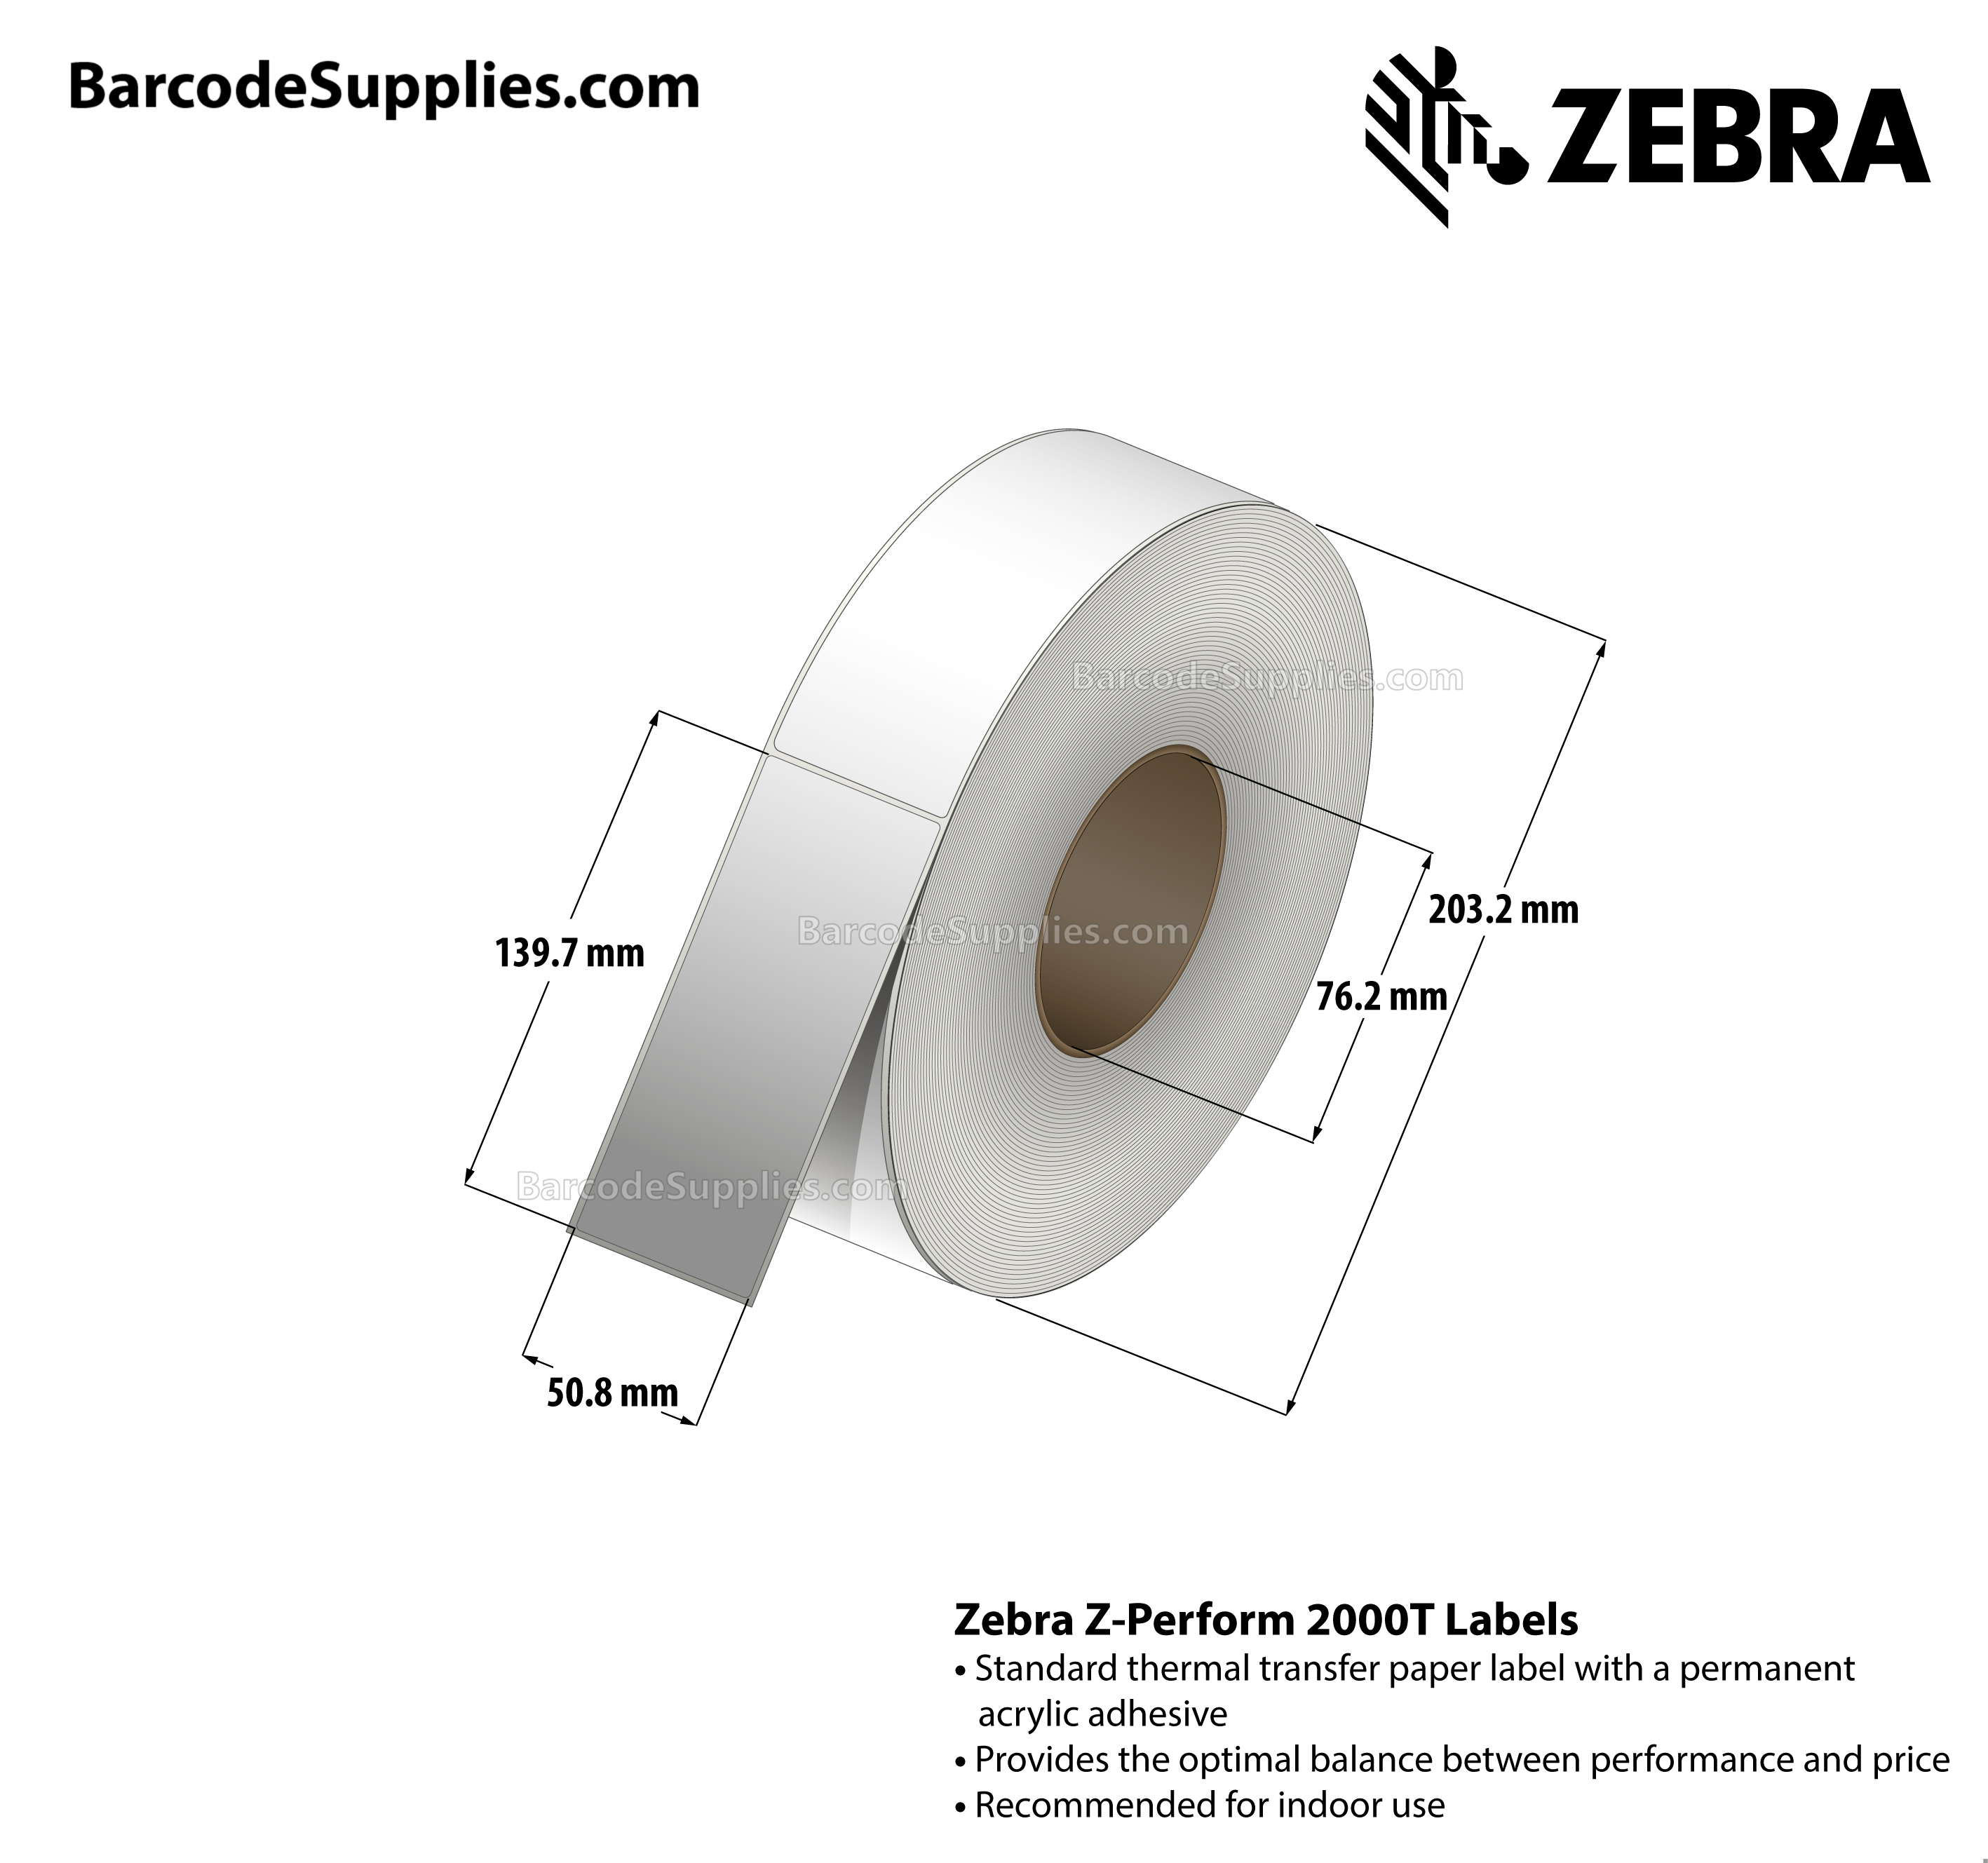 2 x 5.5 Thermal Transfer White Z-Perform 2000T All-Temp Labels With All-Temp Adhesive - Not Perforated - 1050 Labels Per Roll - Carton Of 10 Rolls - 10500 Labels Total - MPN: 72305